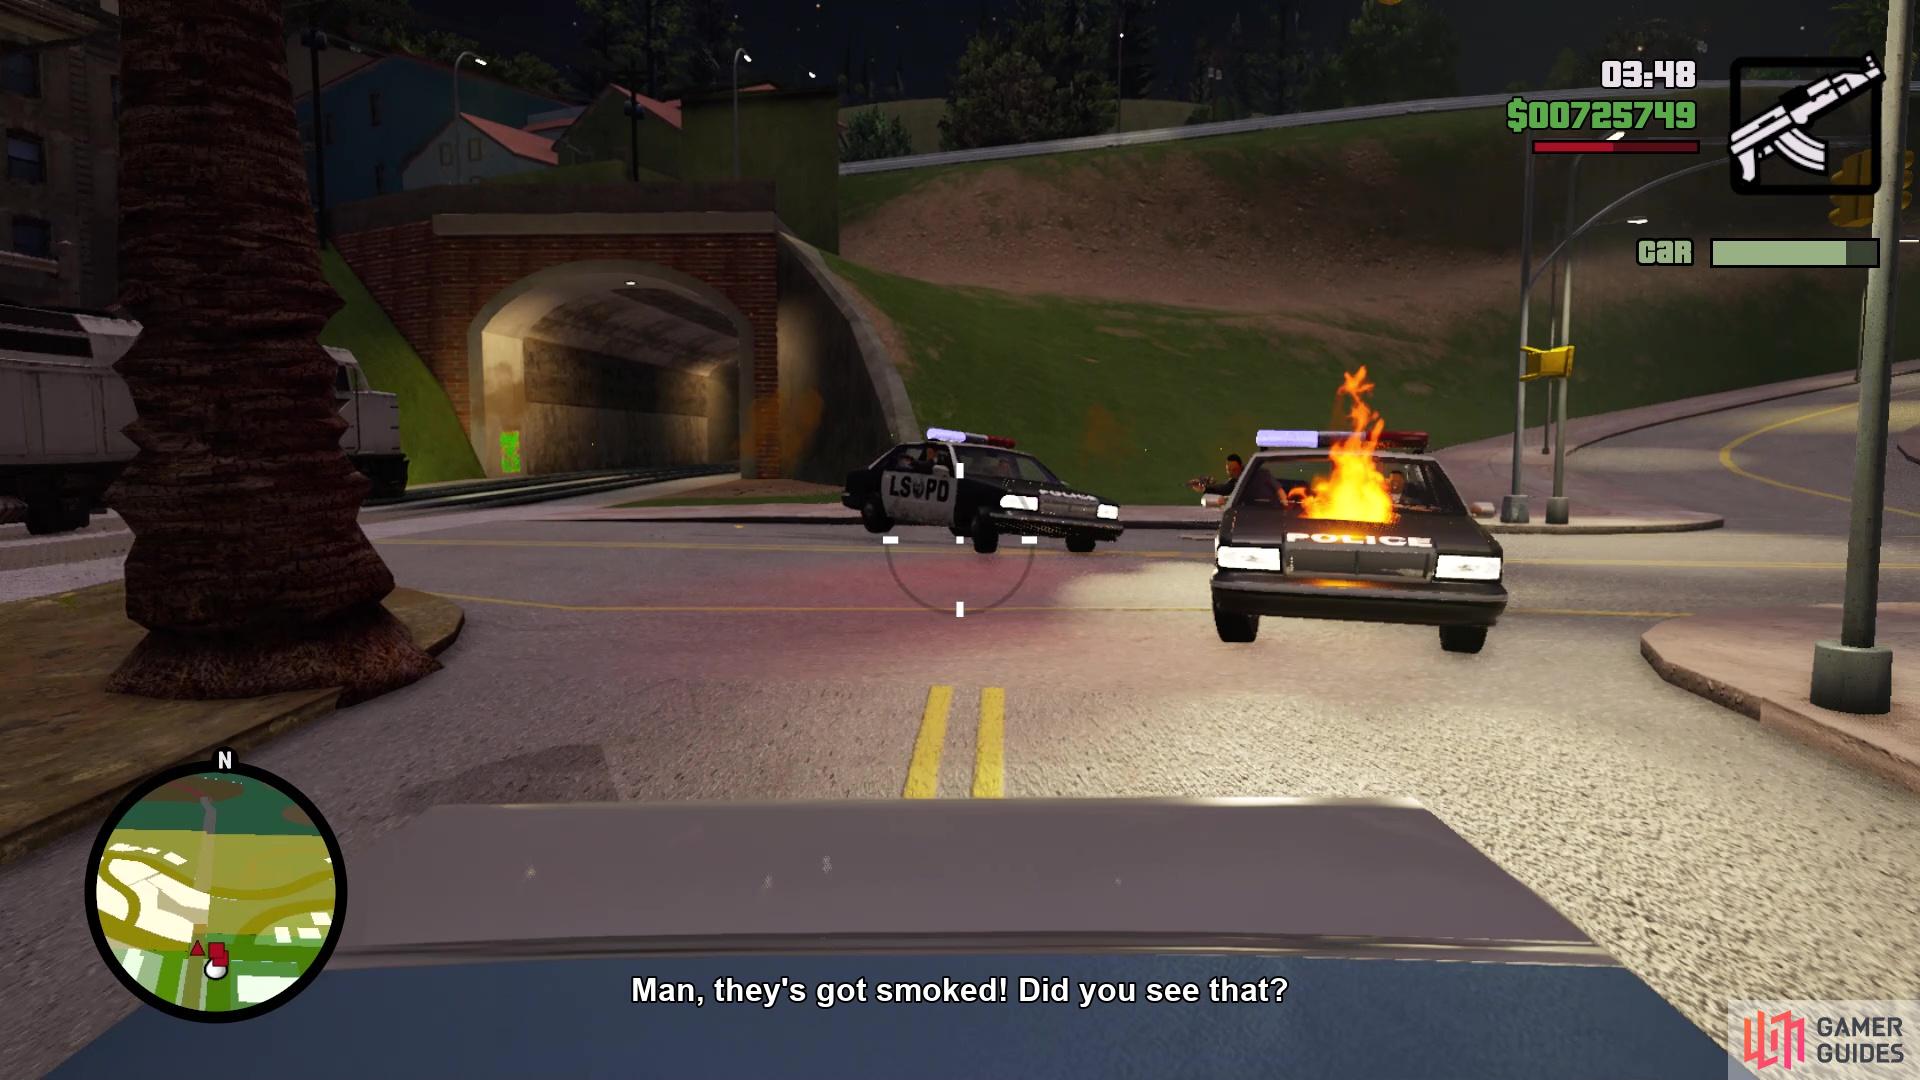 It's best to just fire on the police cars until they explode